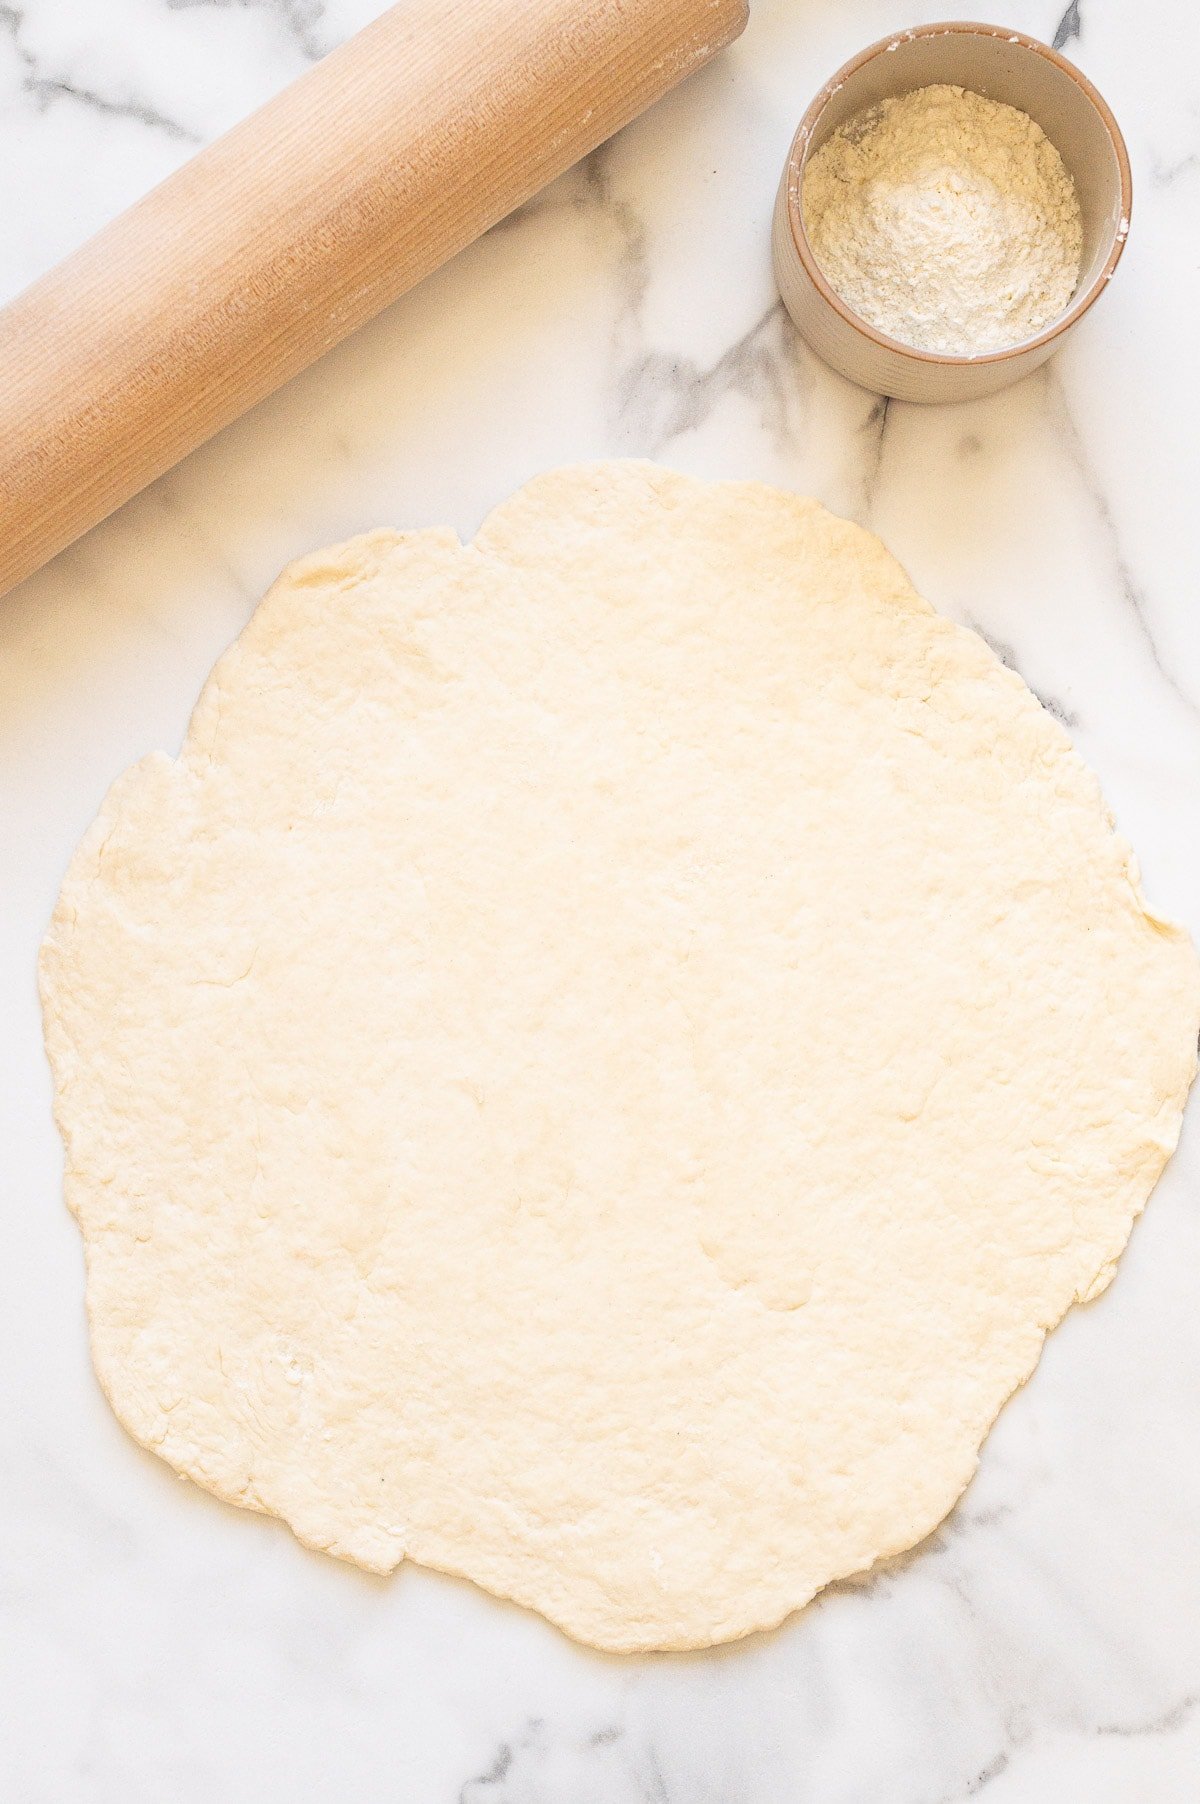 Rolled out pizza dough on the counter, rolling pin and flour in a bowl.